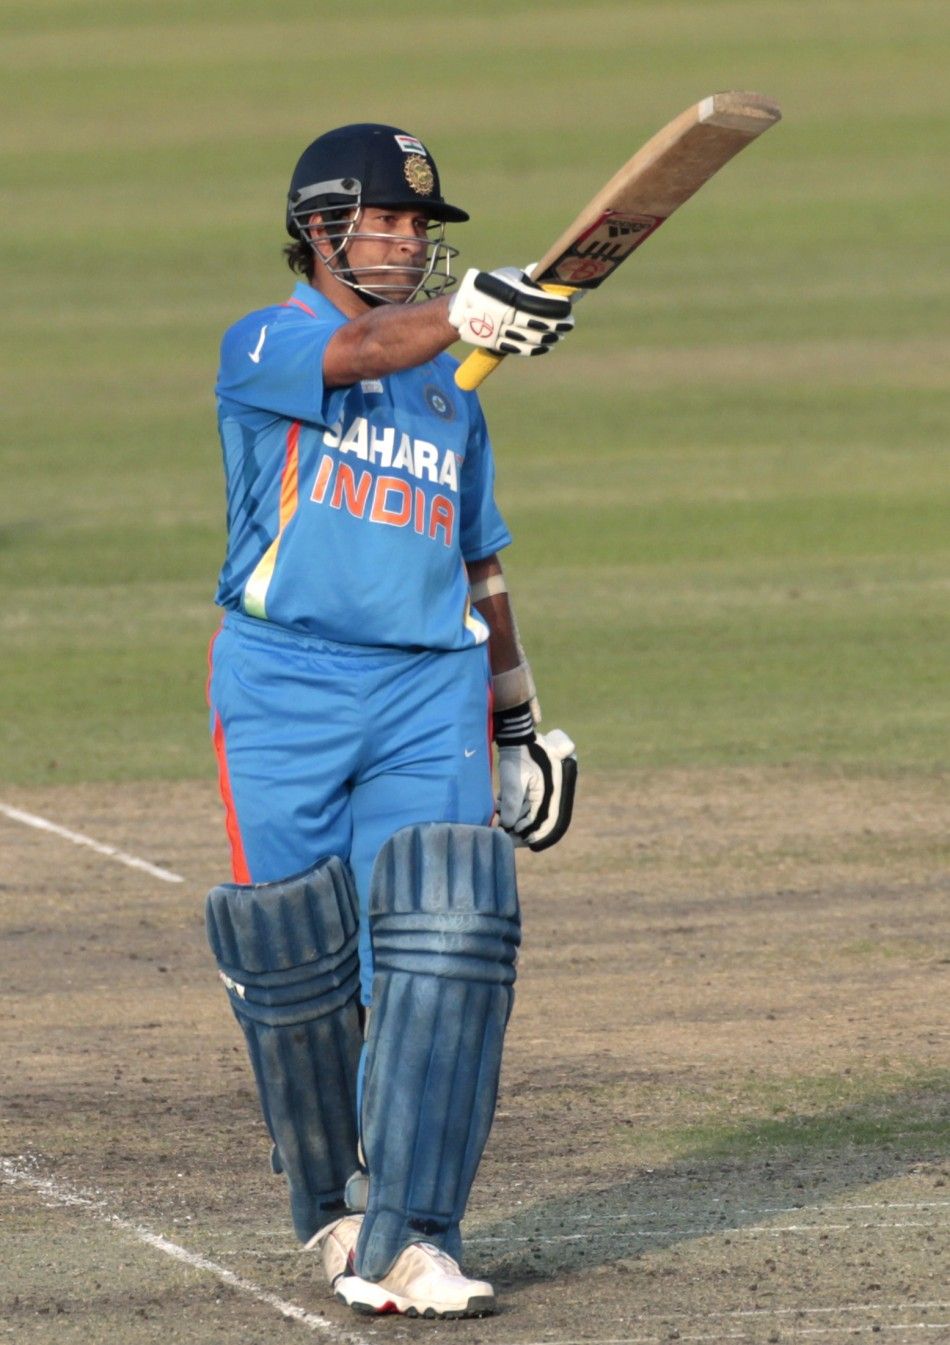 Indias Sachin Tendulkar celebrates after he scored his 100th centuries against Bangladesh during their One Day International ODI cricket match of Asia Cup in Dhaka March 16, 2012. 